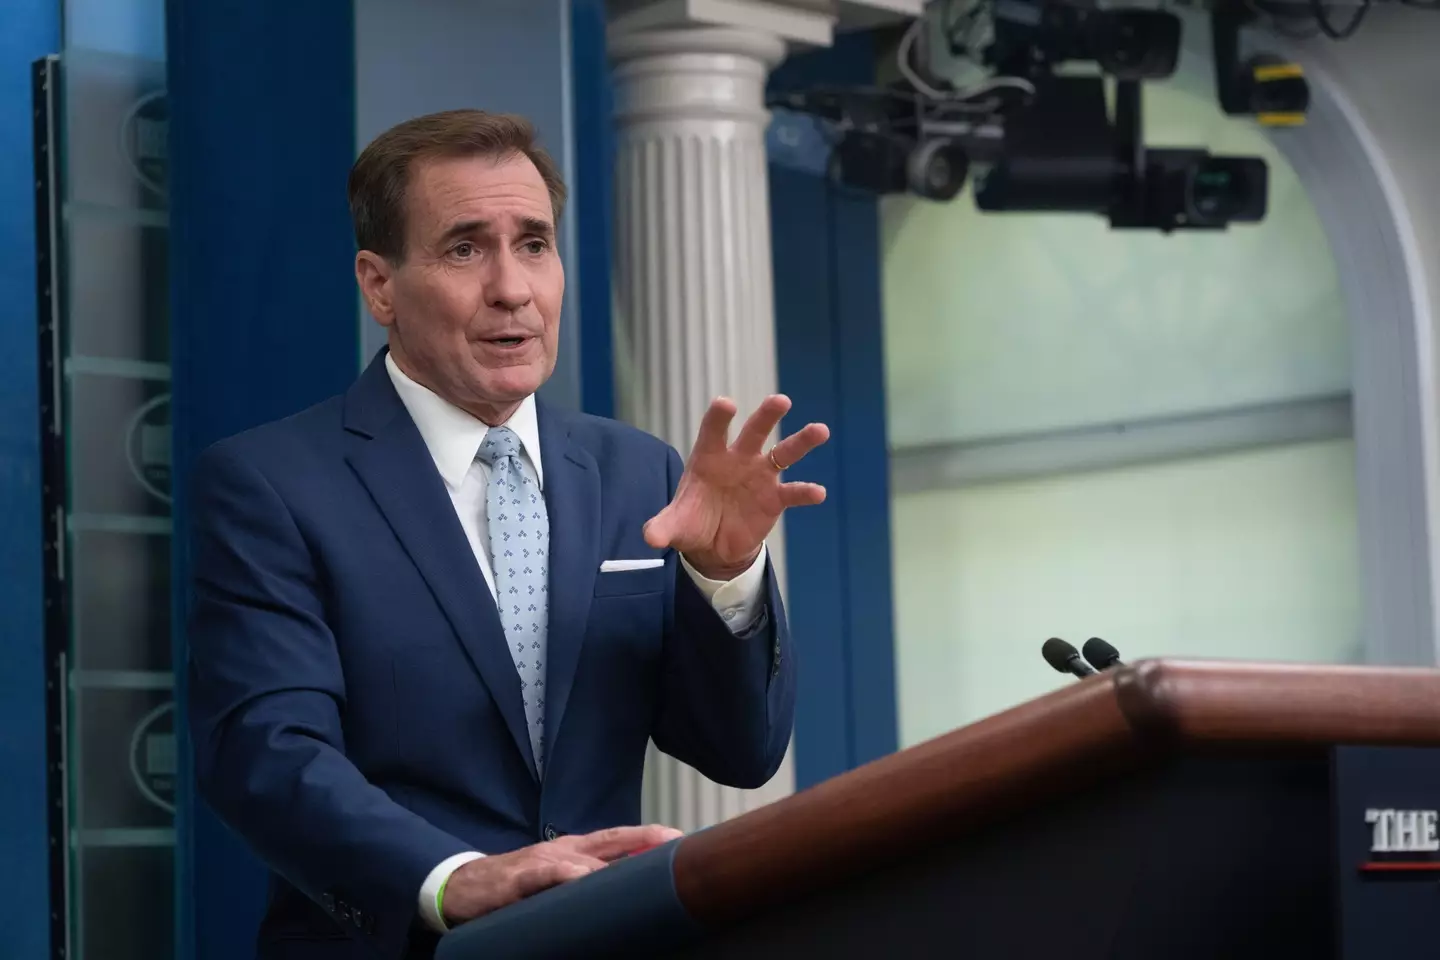 White House spokesman John Kirby said Putin's threats were 'irresponsible' but insisted the US would take them seriously.